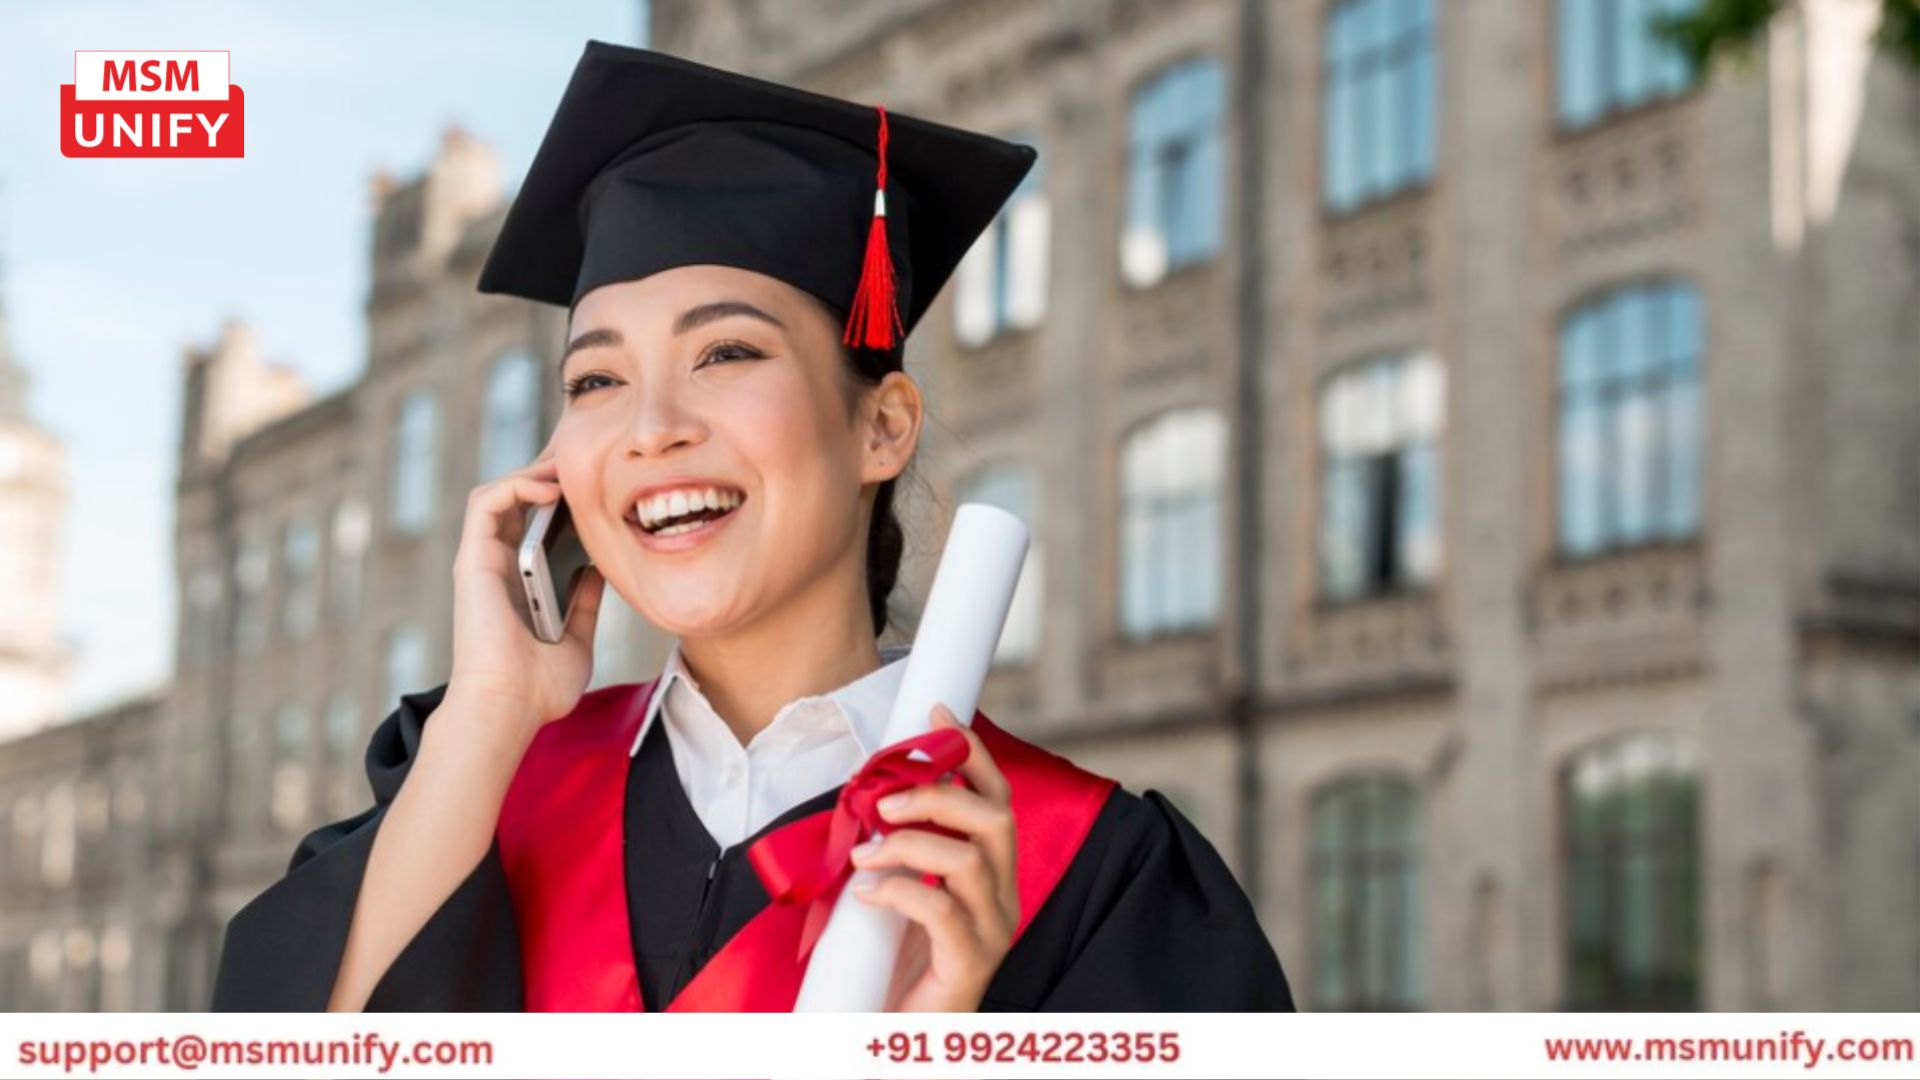 Embark on a transformative academic journey through '<a href="https://www.msmunify.com/study-in-canada/">Study in Canada</a>. Immerse yourself in unmatched education, cultural richness, and boundless potential. Click now to discover the gateway to a brighter and more promising future.

